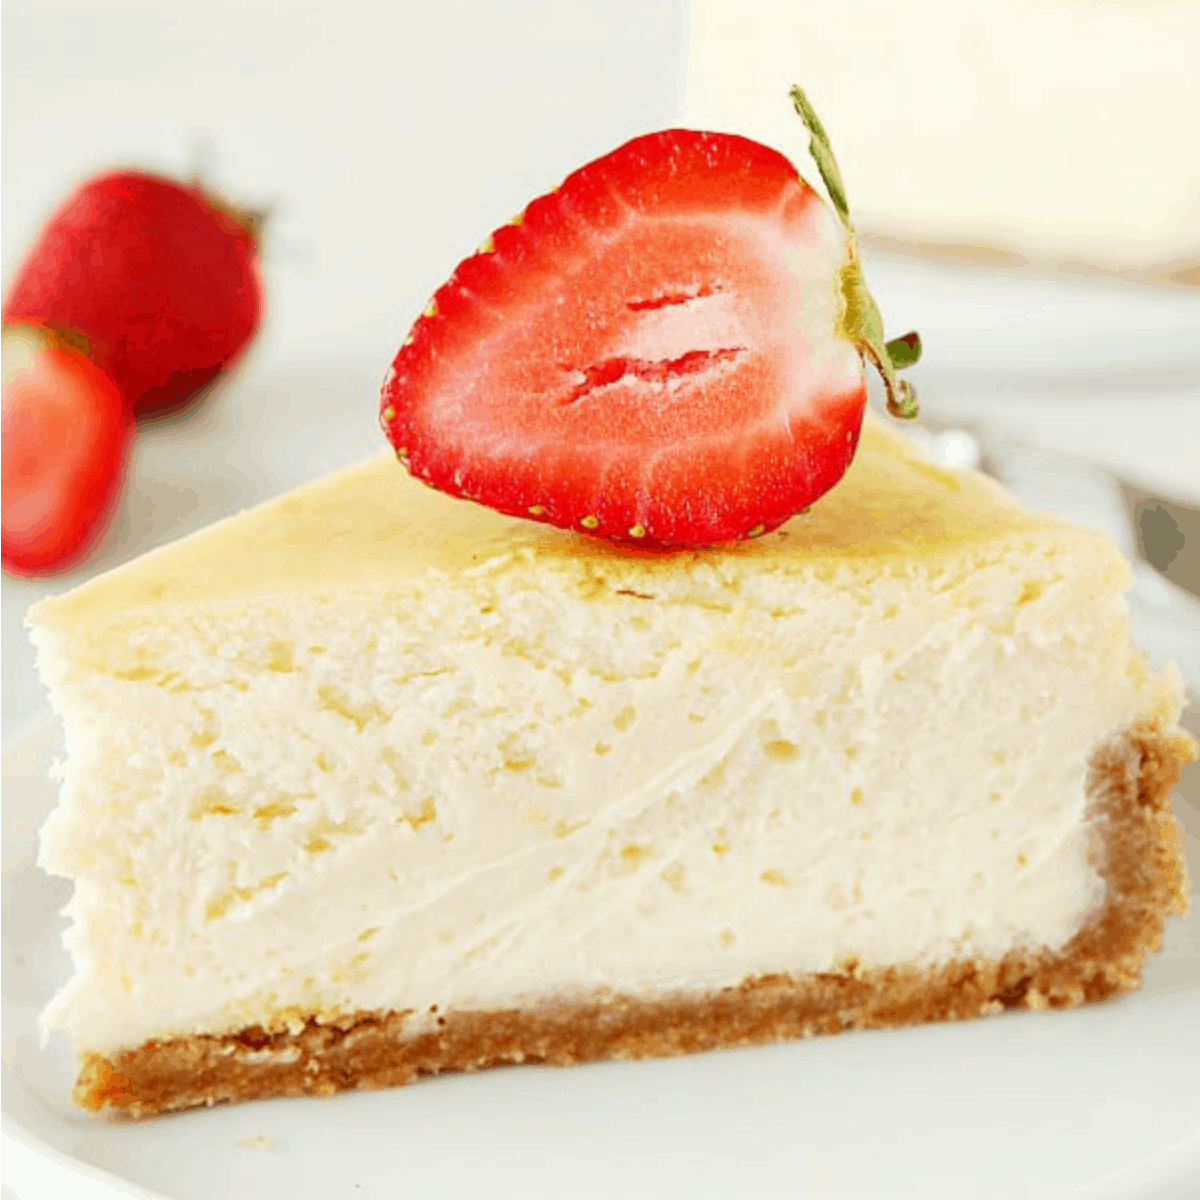 https://www.crunchycreamysweet.com/wp-content/uploads/2019/10/perfect-cheesecake-feat.png